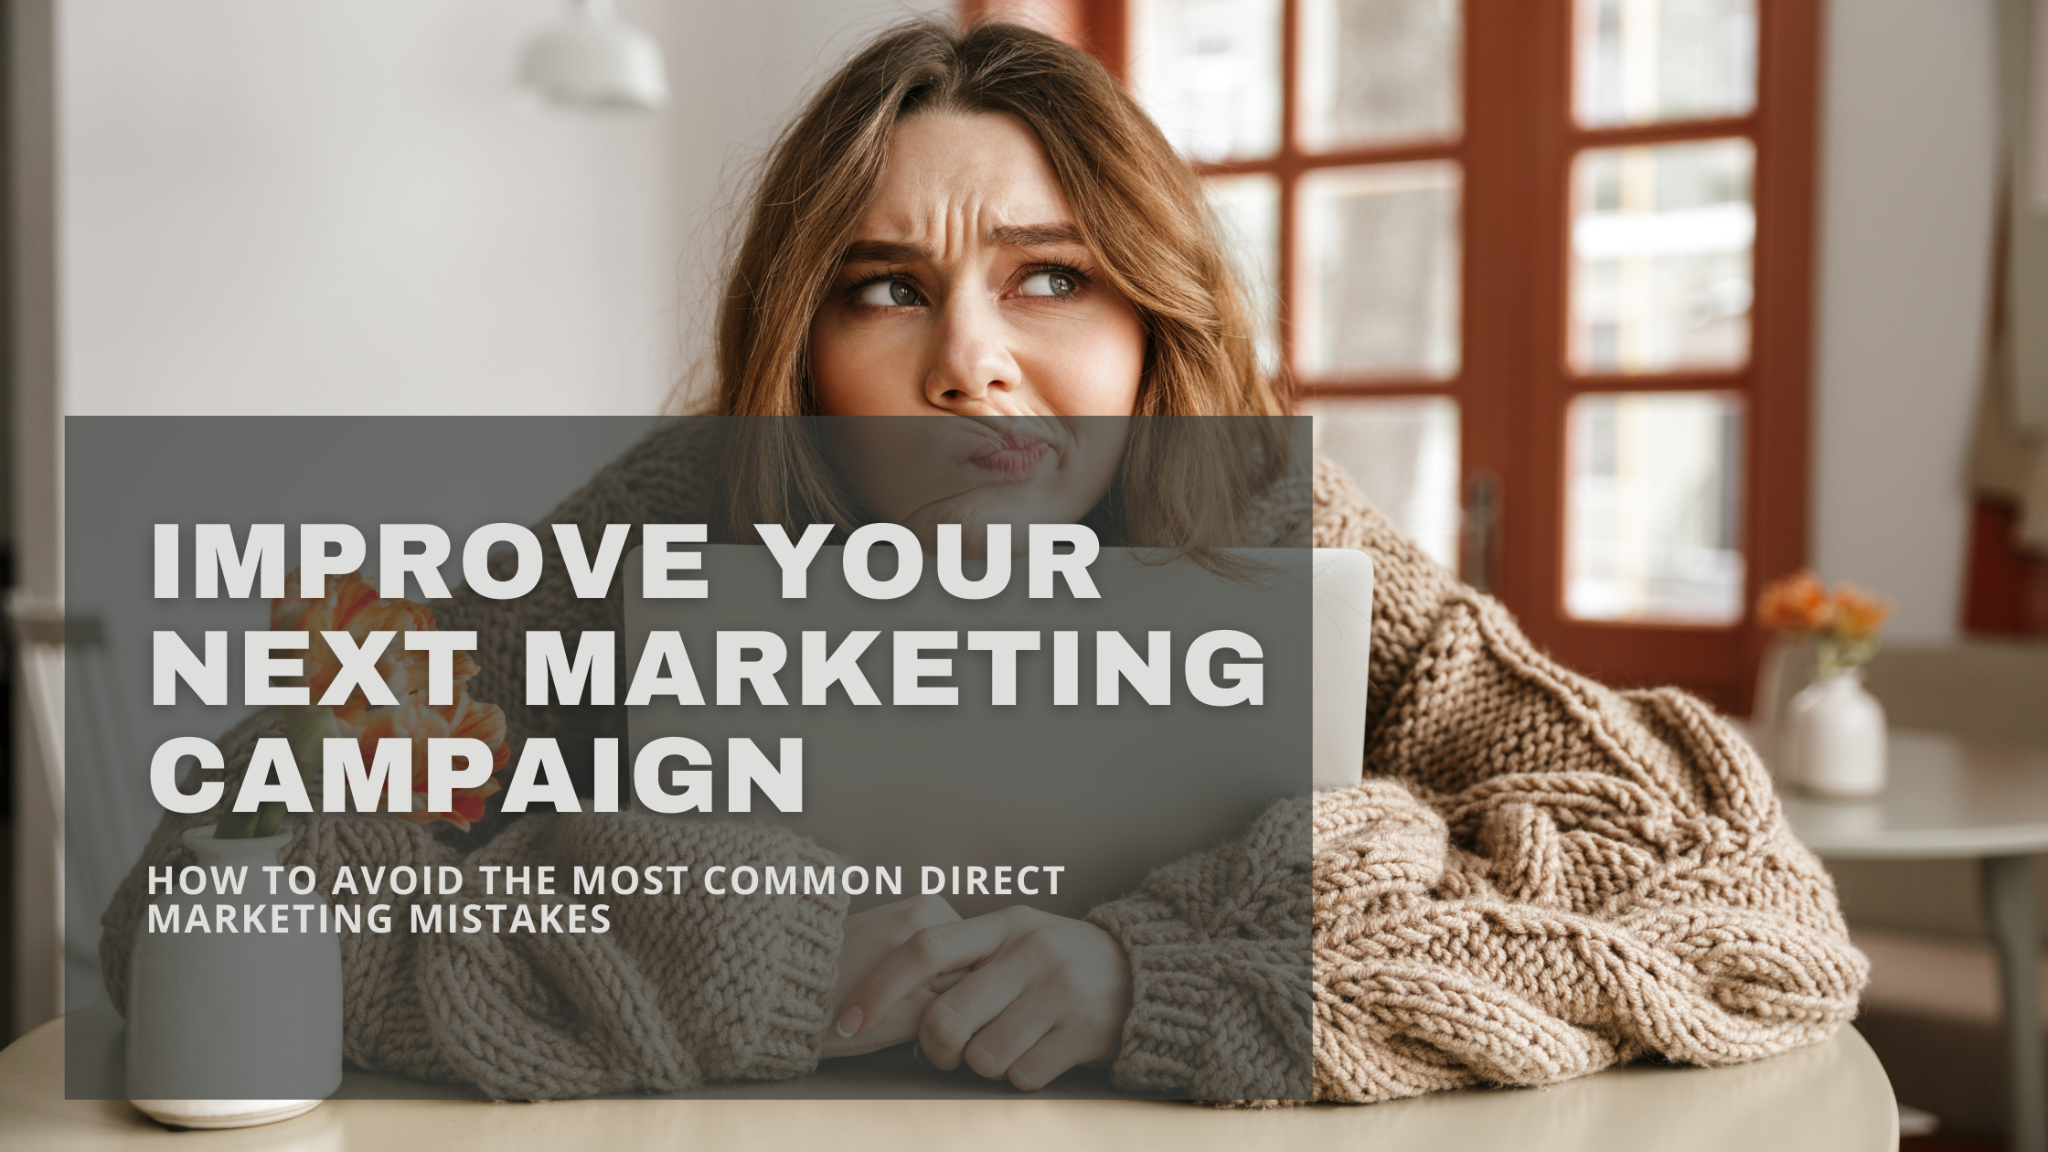 Your direct client marketing campaign didn’t work, what went wrong?